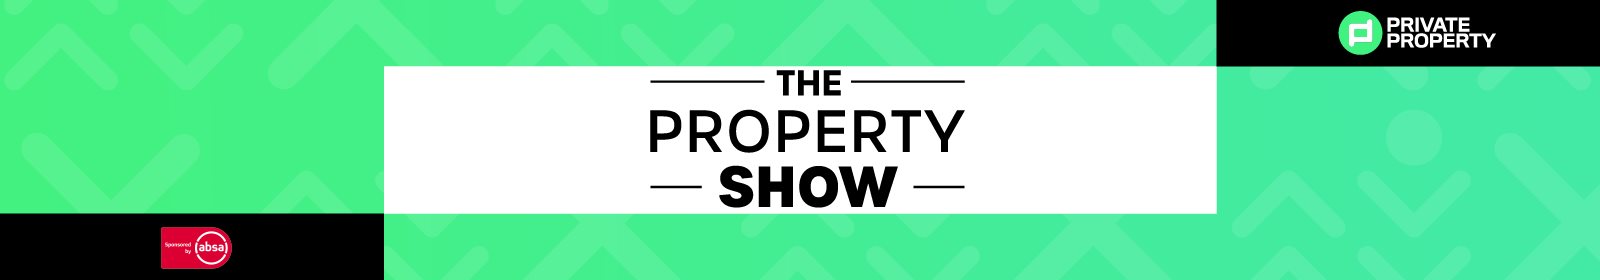 Private Property: The Property Show Ticket Competition 